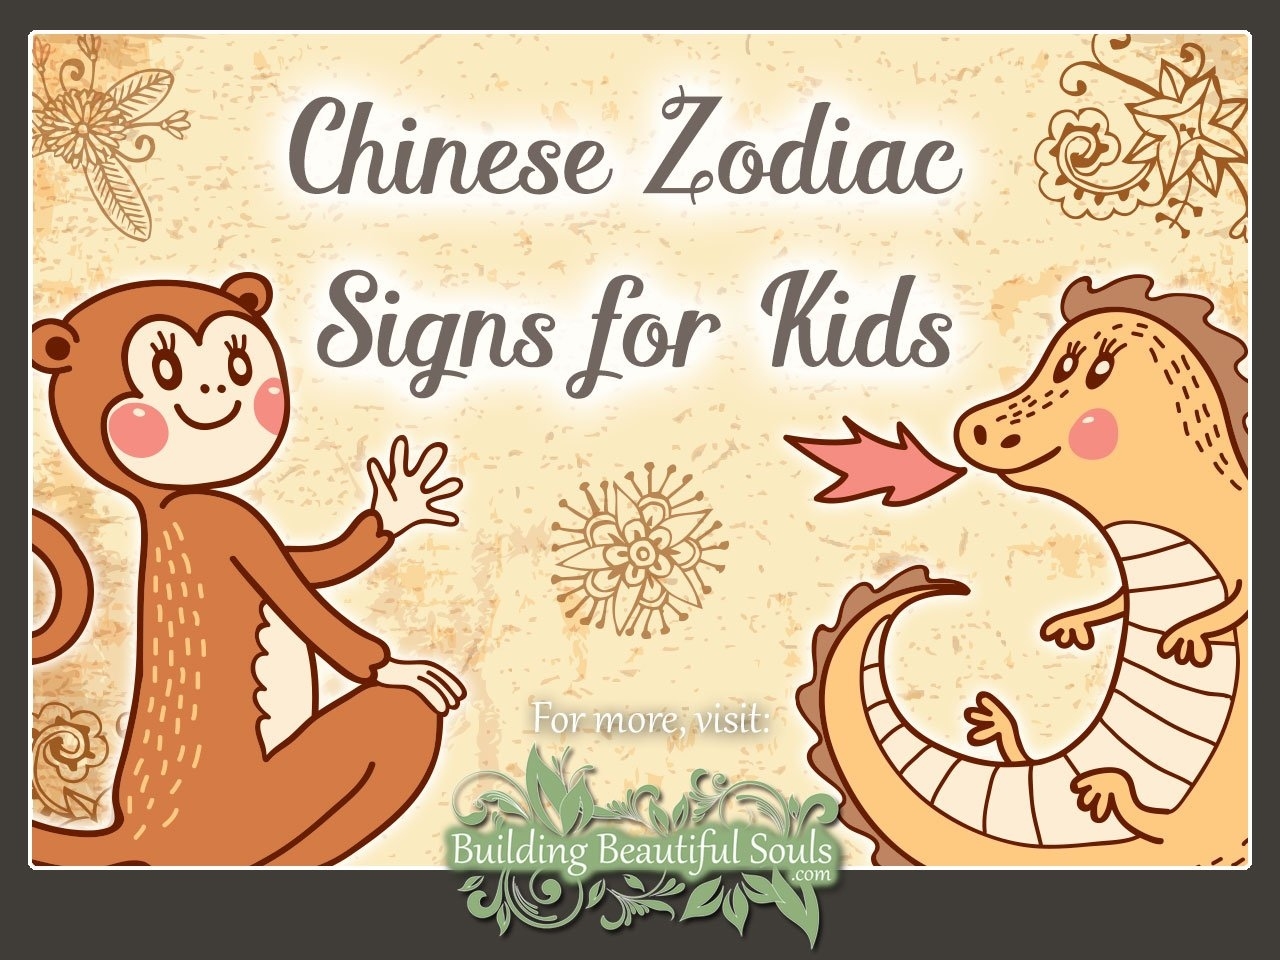 Chinese Zodiac For Kids | Learn About Chinese The Zodiac Find More About Chinese Zodiac Calendar